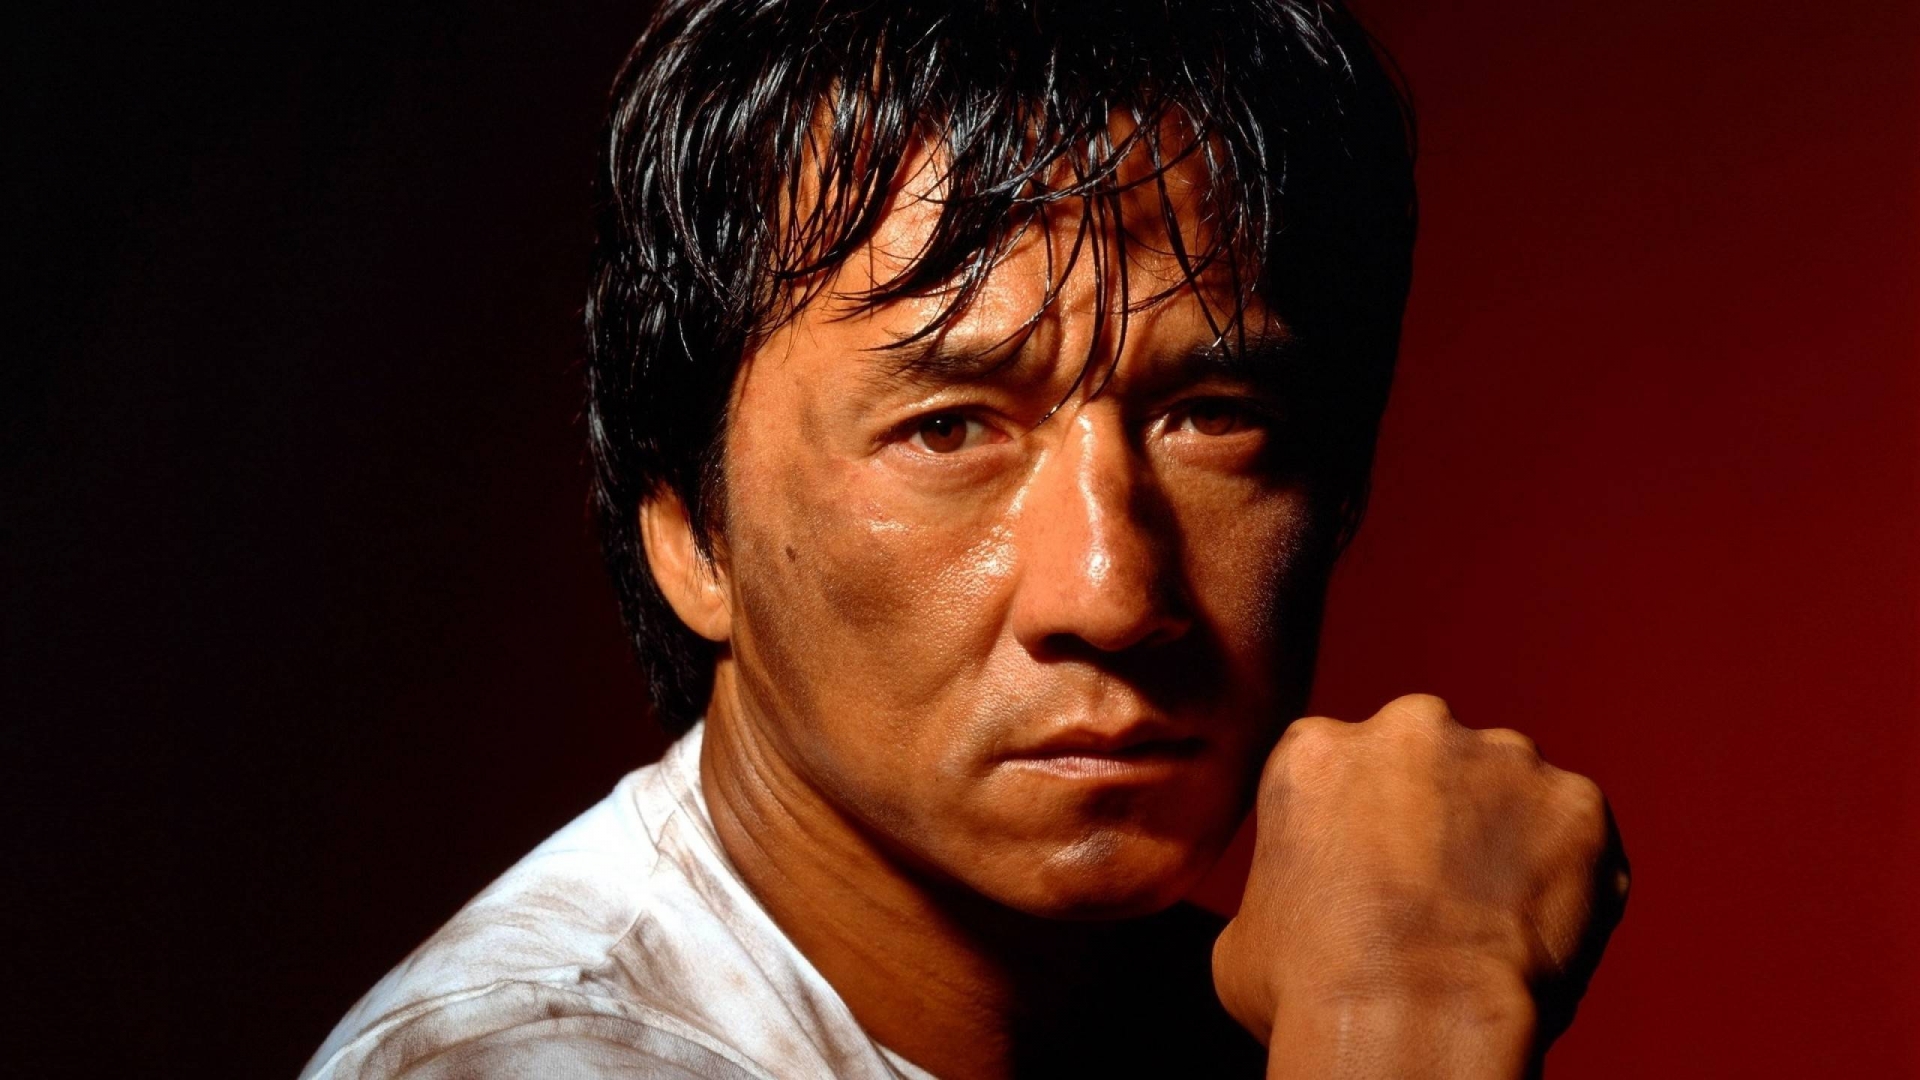 Jackie Chan Pose for 1920 x 1080 HDTV 1080p resolution